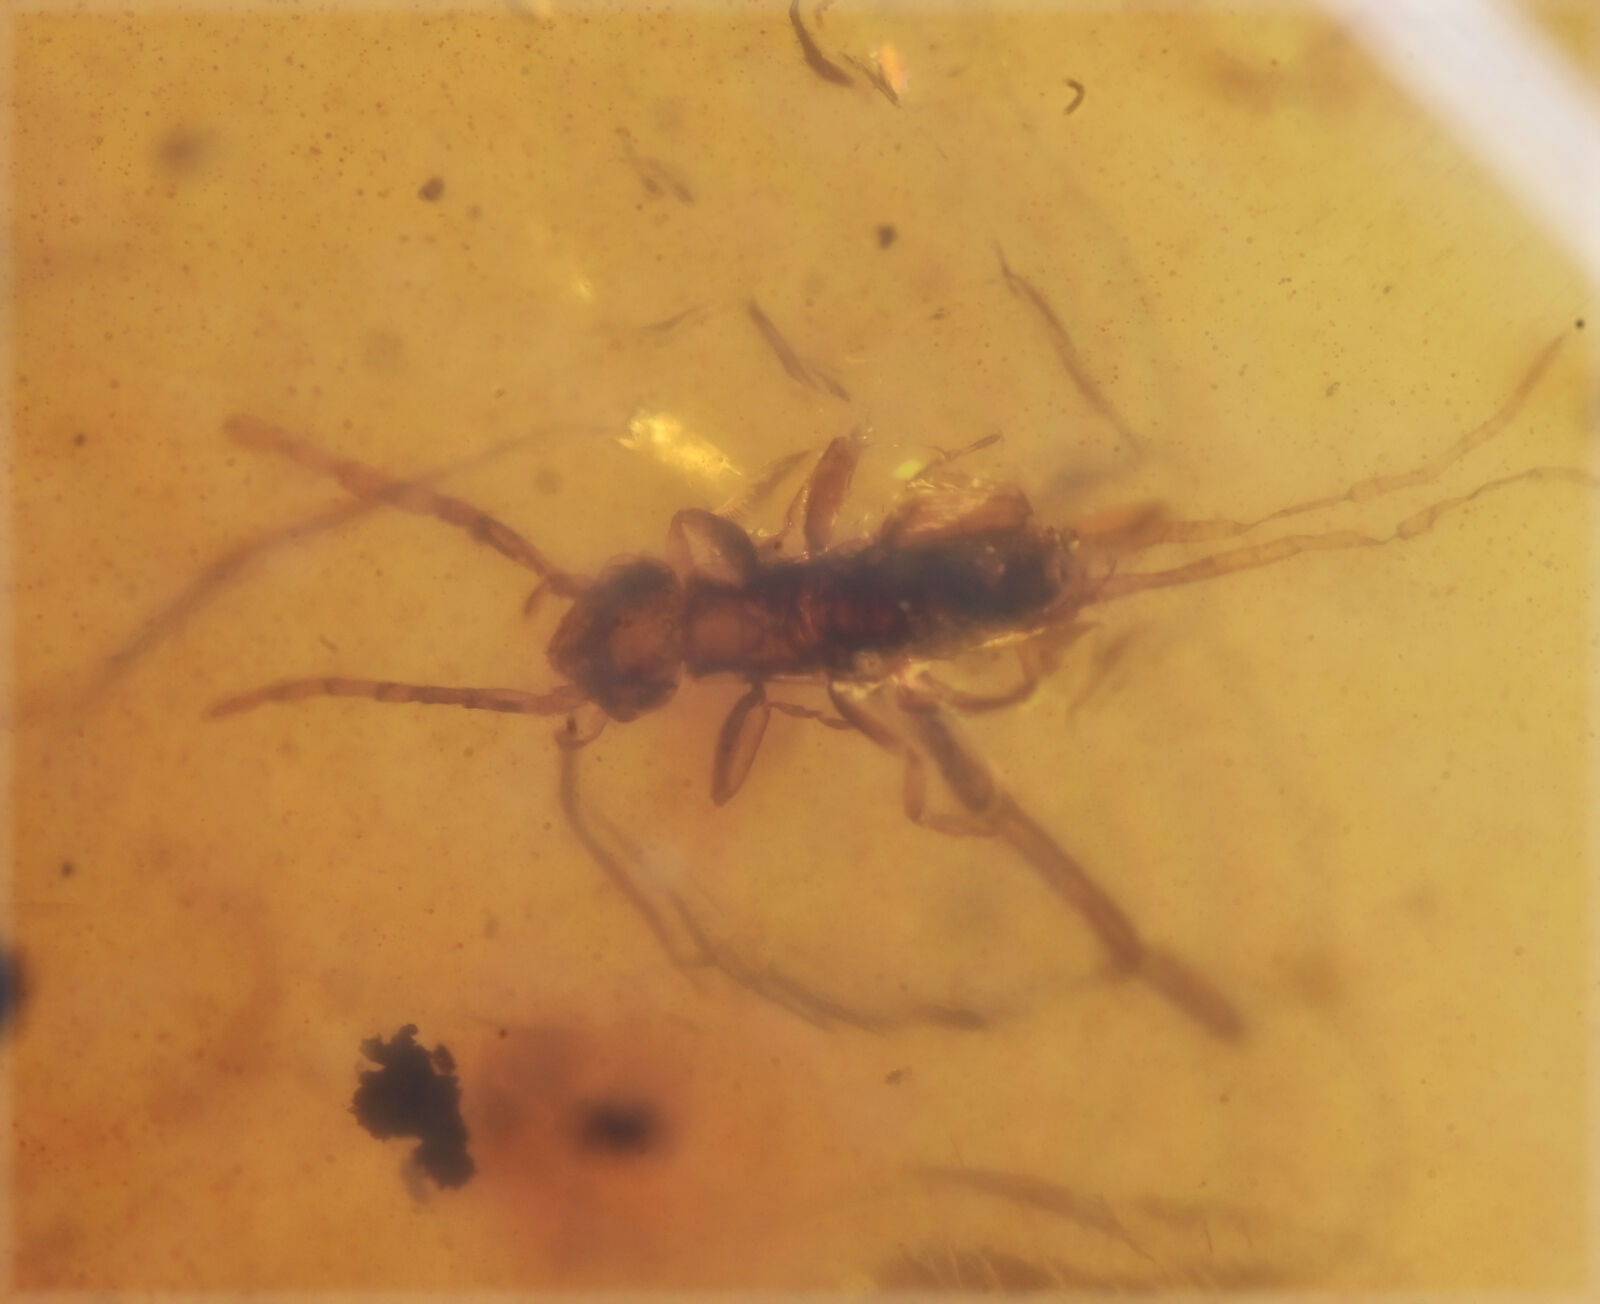 Orthoptera (Cricket Nymph), Fossil insect inclusion in Burmese Amber